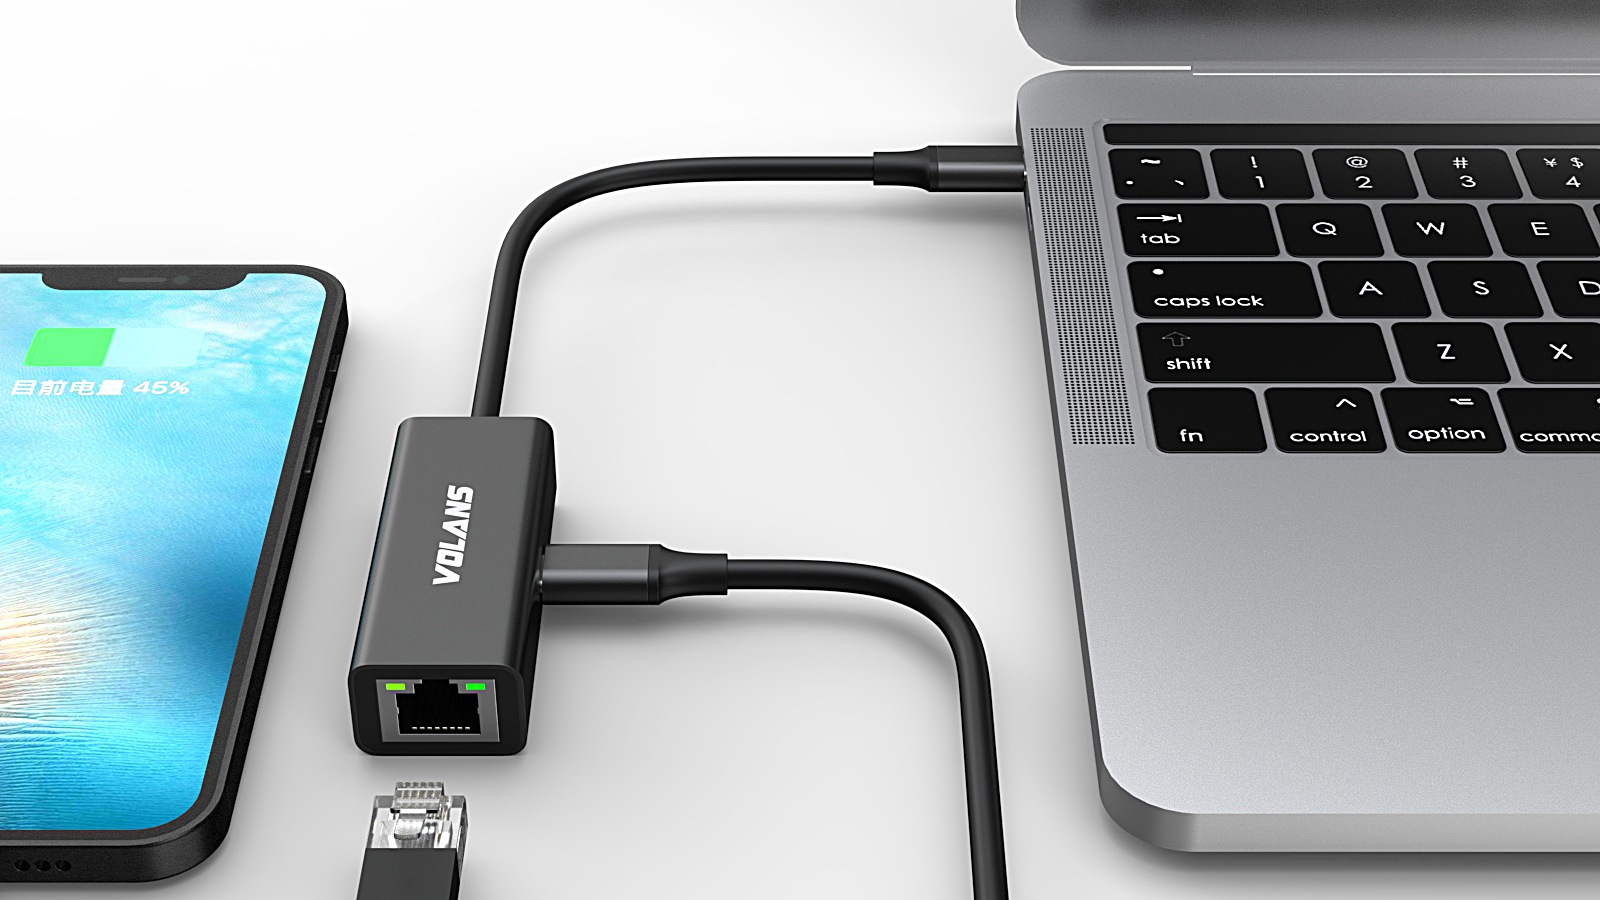 A large marketing image providing additional information about the product Volans VL-RJ45-CP Aluminium USB-C to Gigabit Ethernet Network Adapter with PD3.0 - Additional alt info not provided